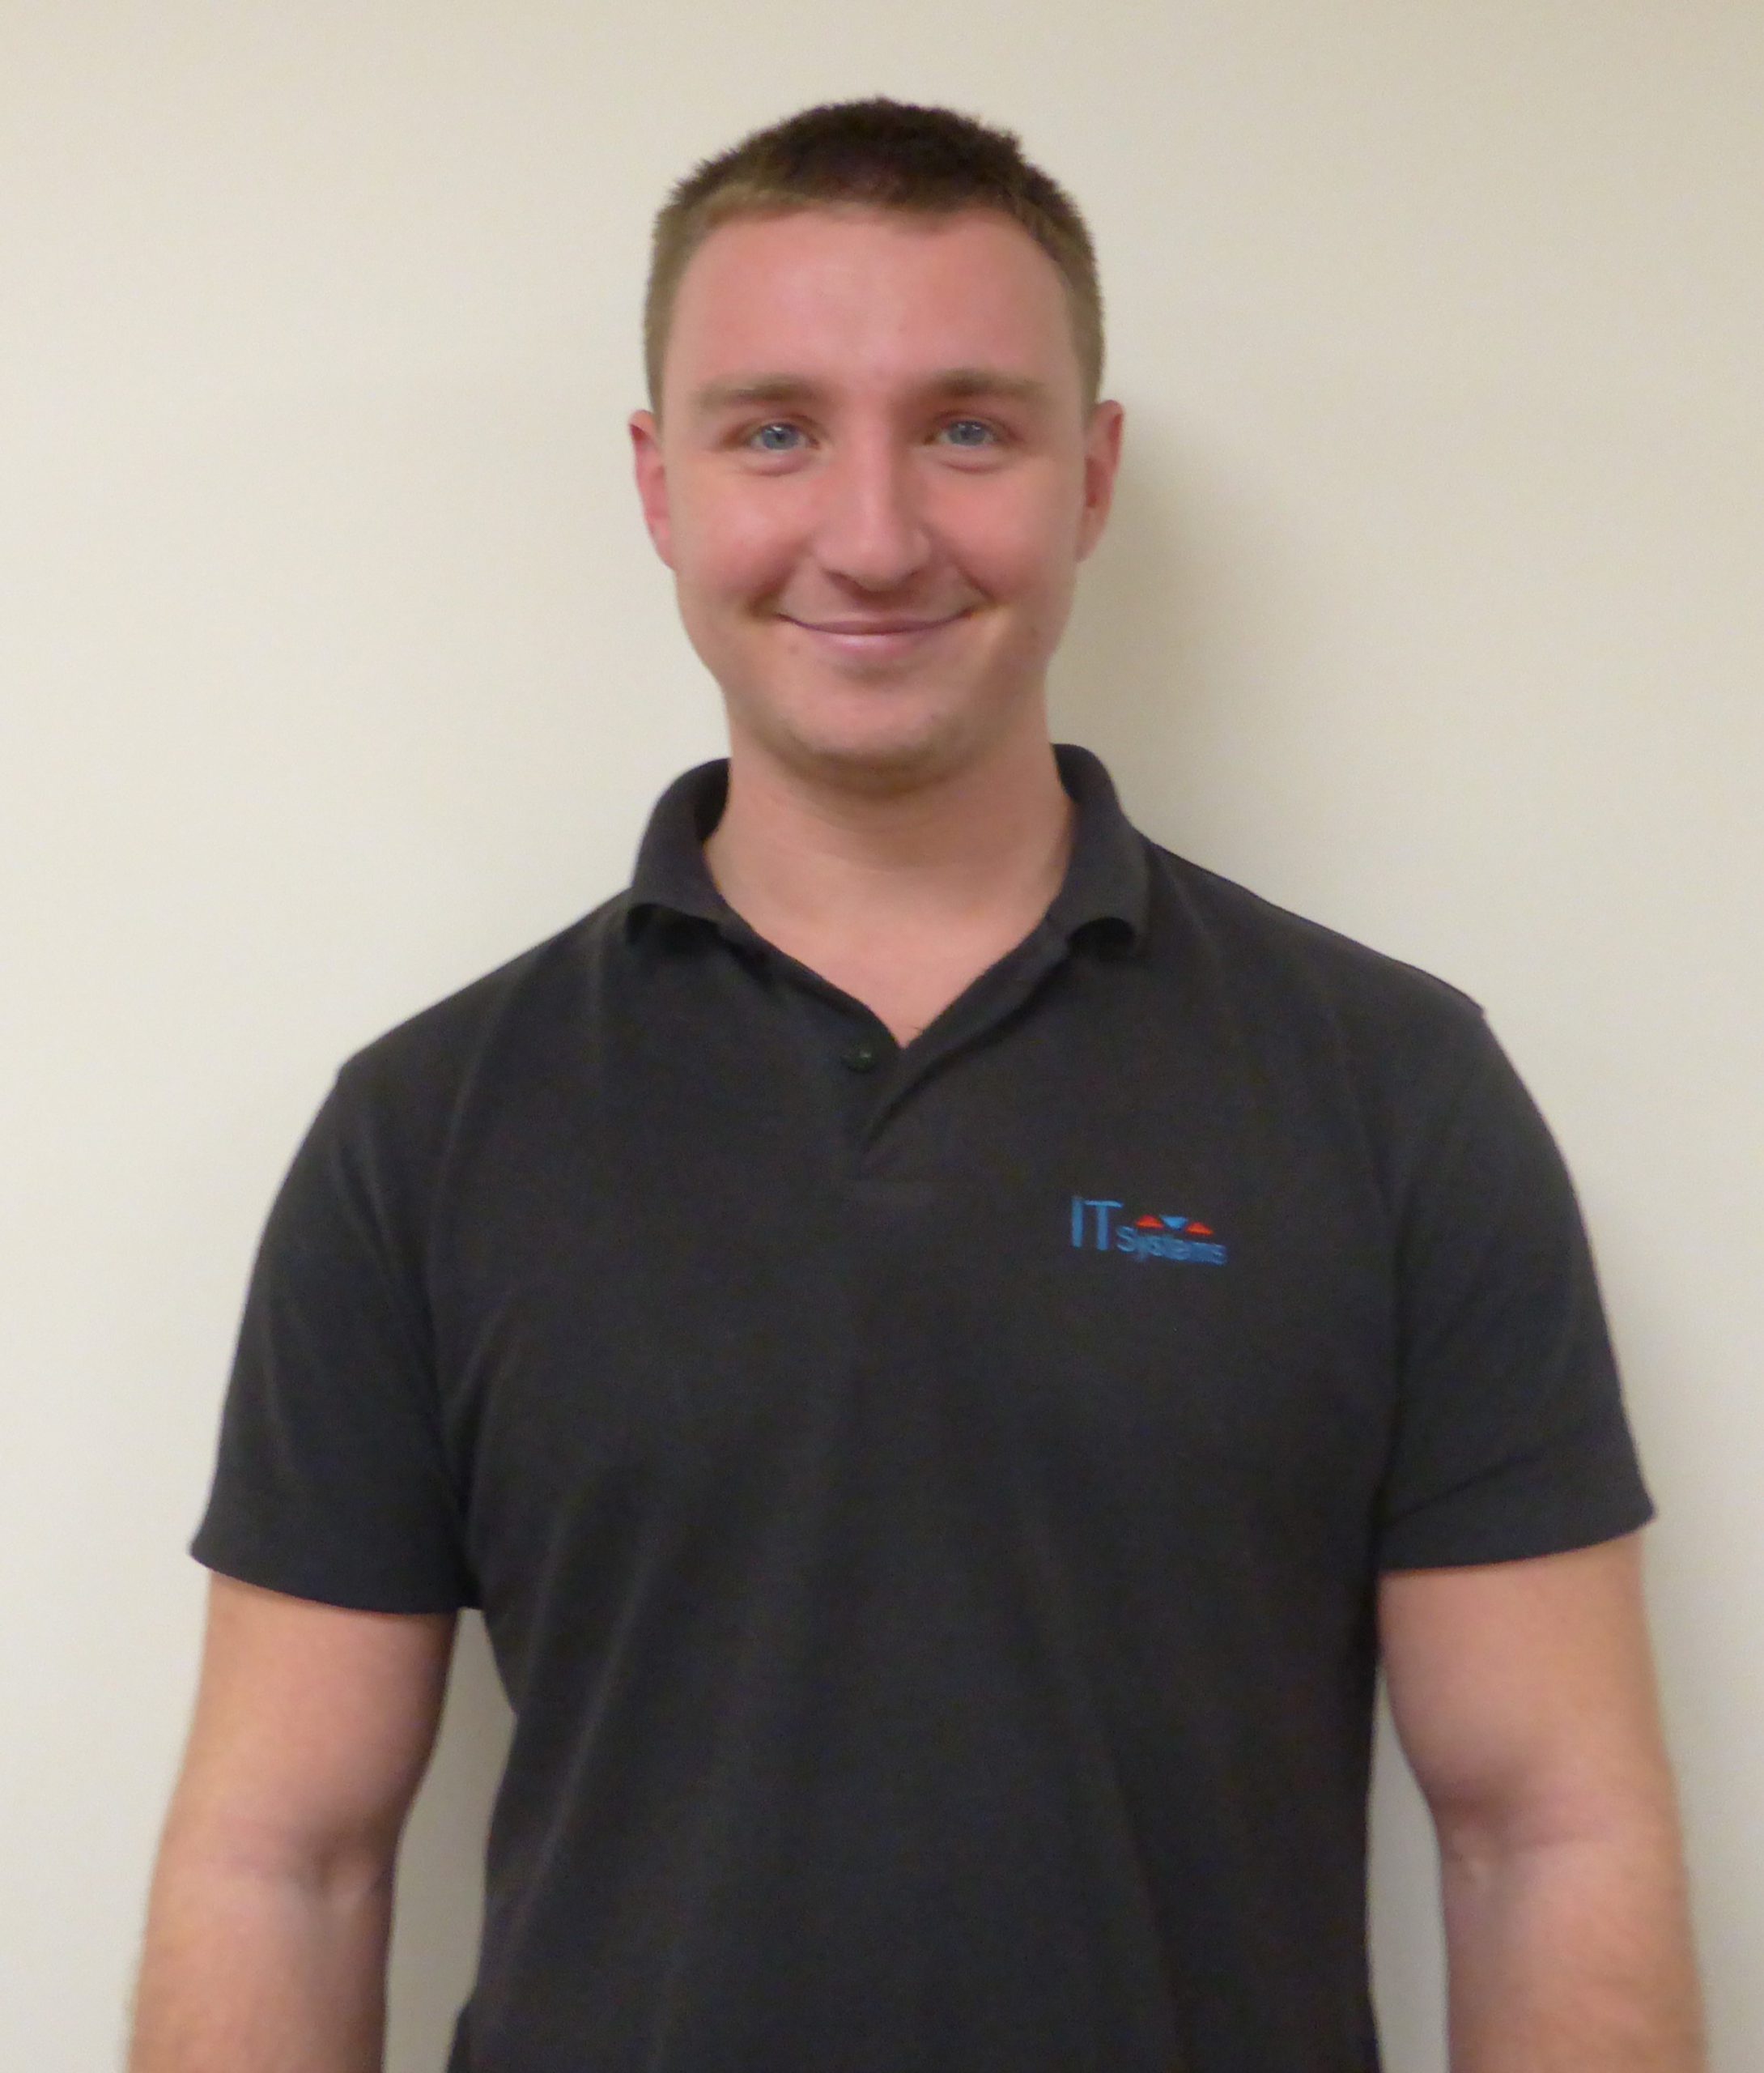 Leo Hansom - Technical Support Assistant